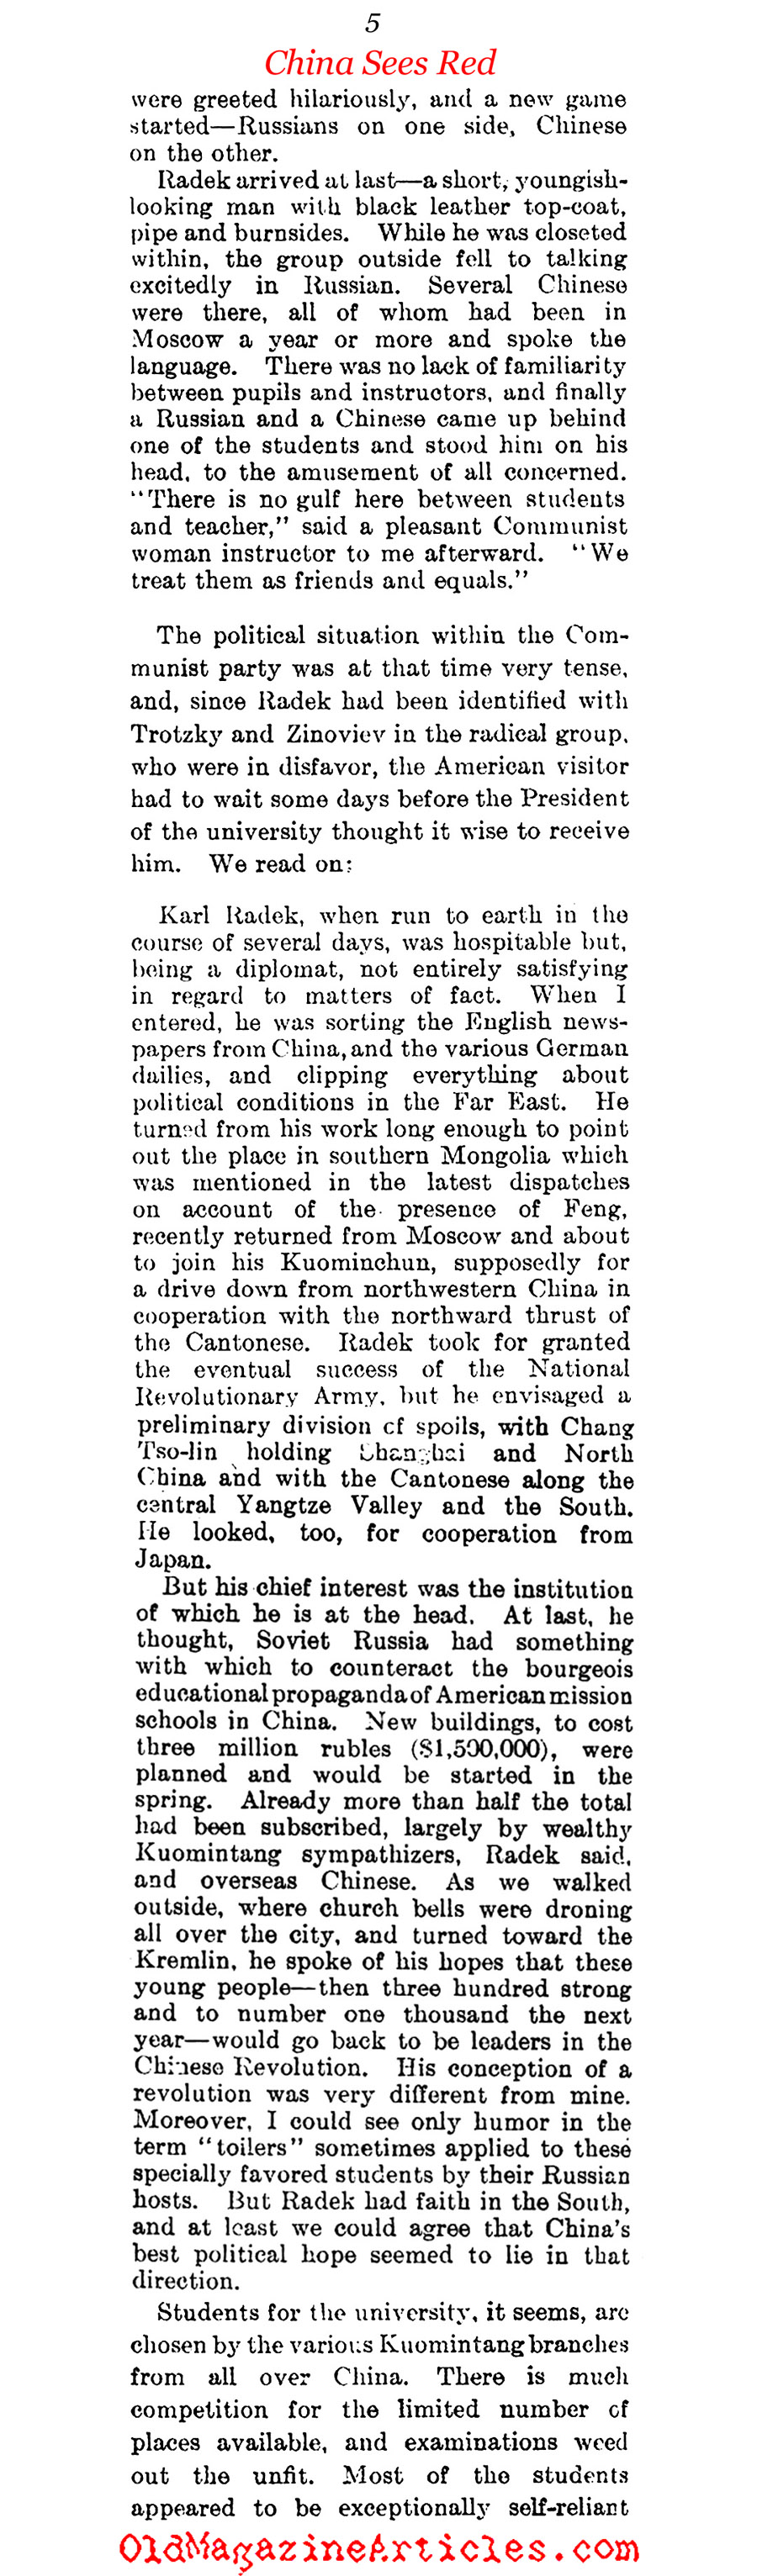 ''Where Moscow Is Teaching China to see Red'' (Literary Digest, 1927)